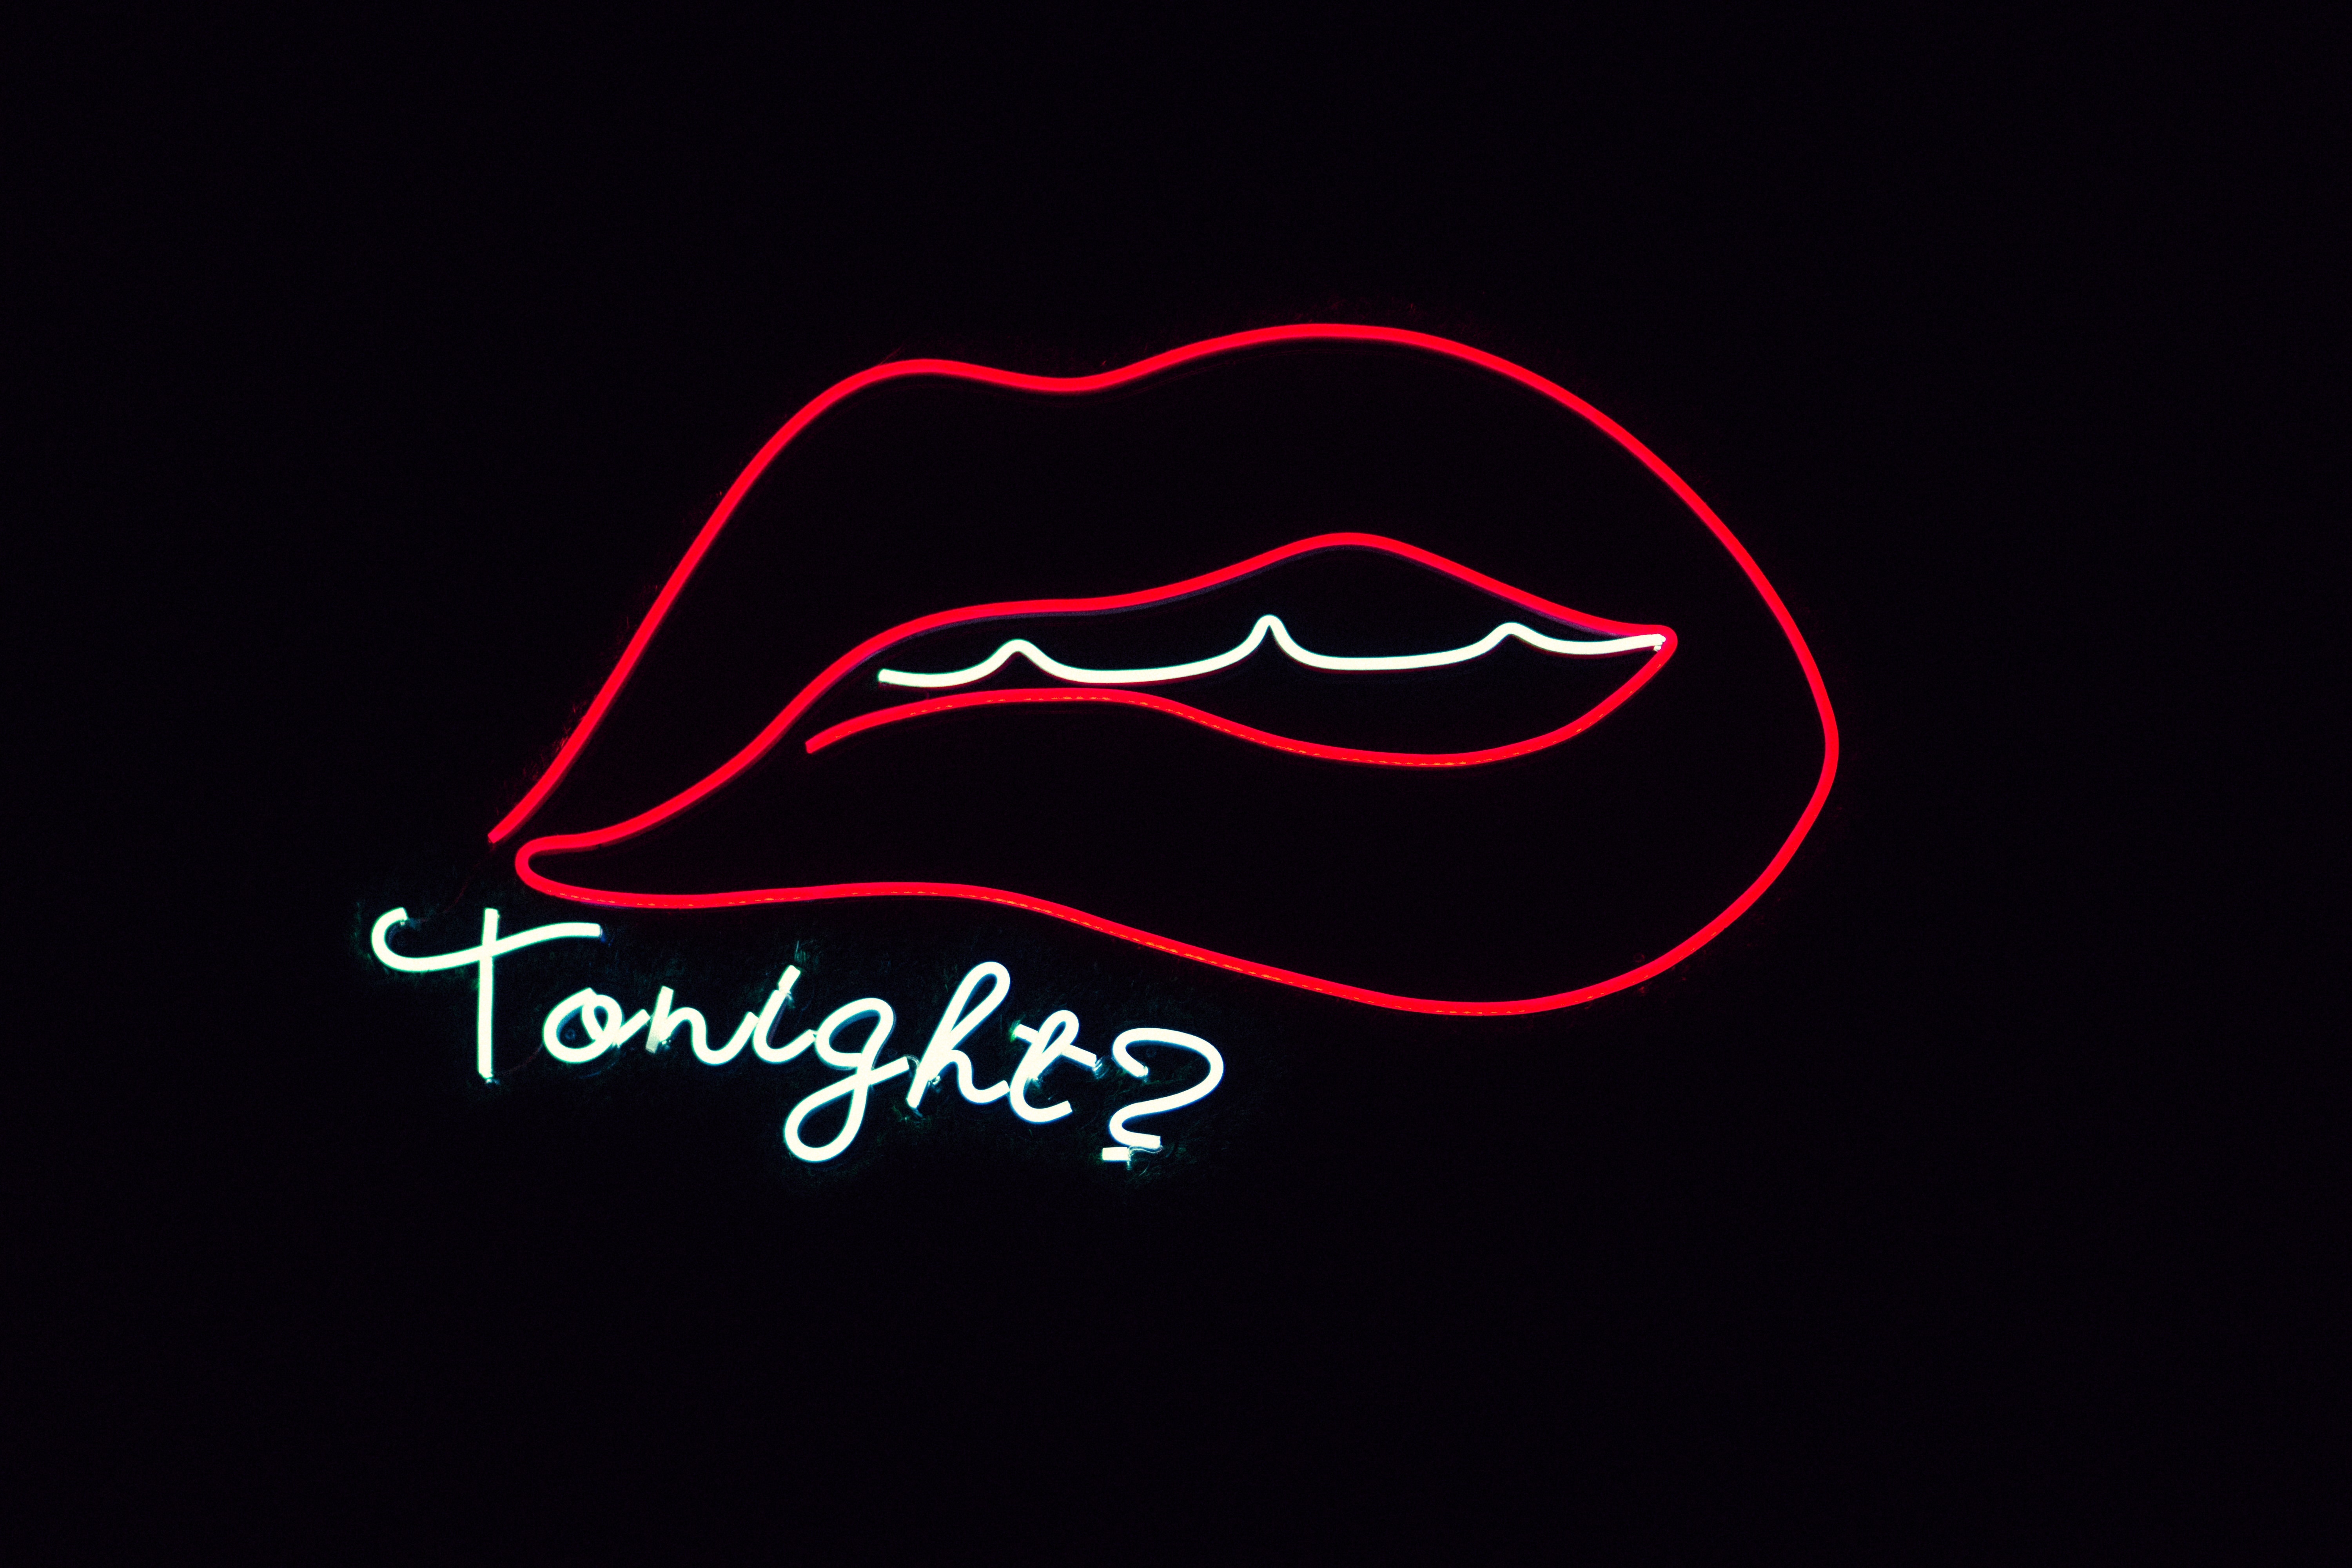 lips-line-drawing-with-tonight-text-overlay-on-black-2740839.jpg